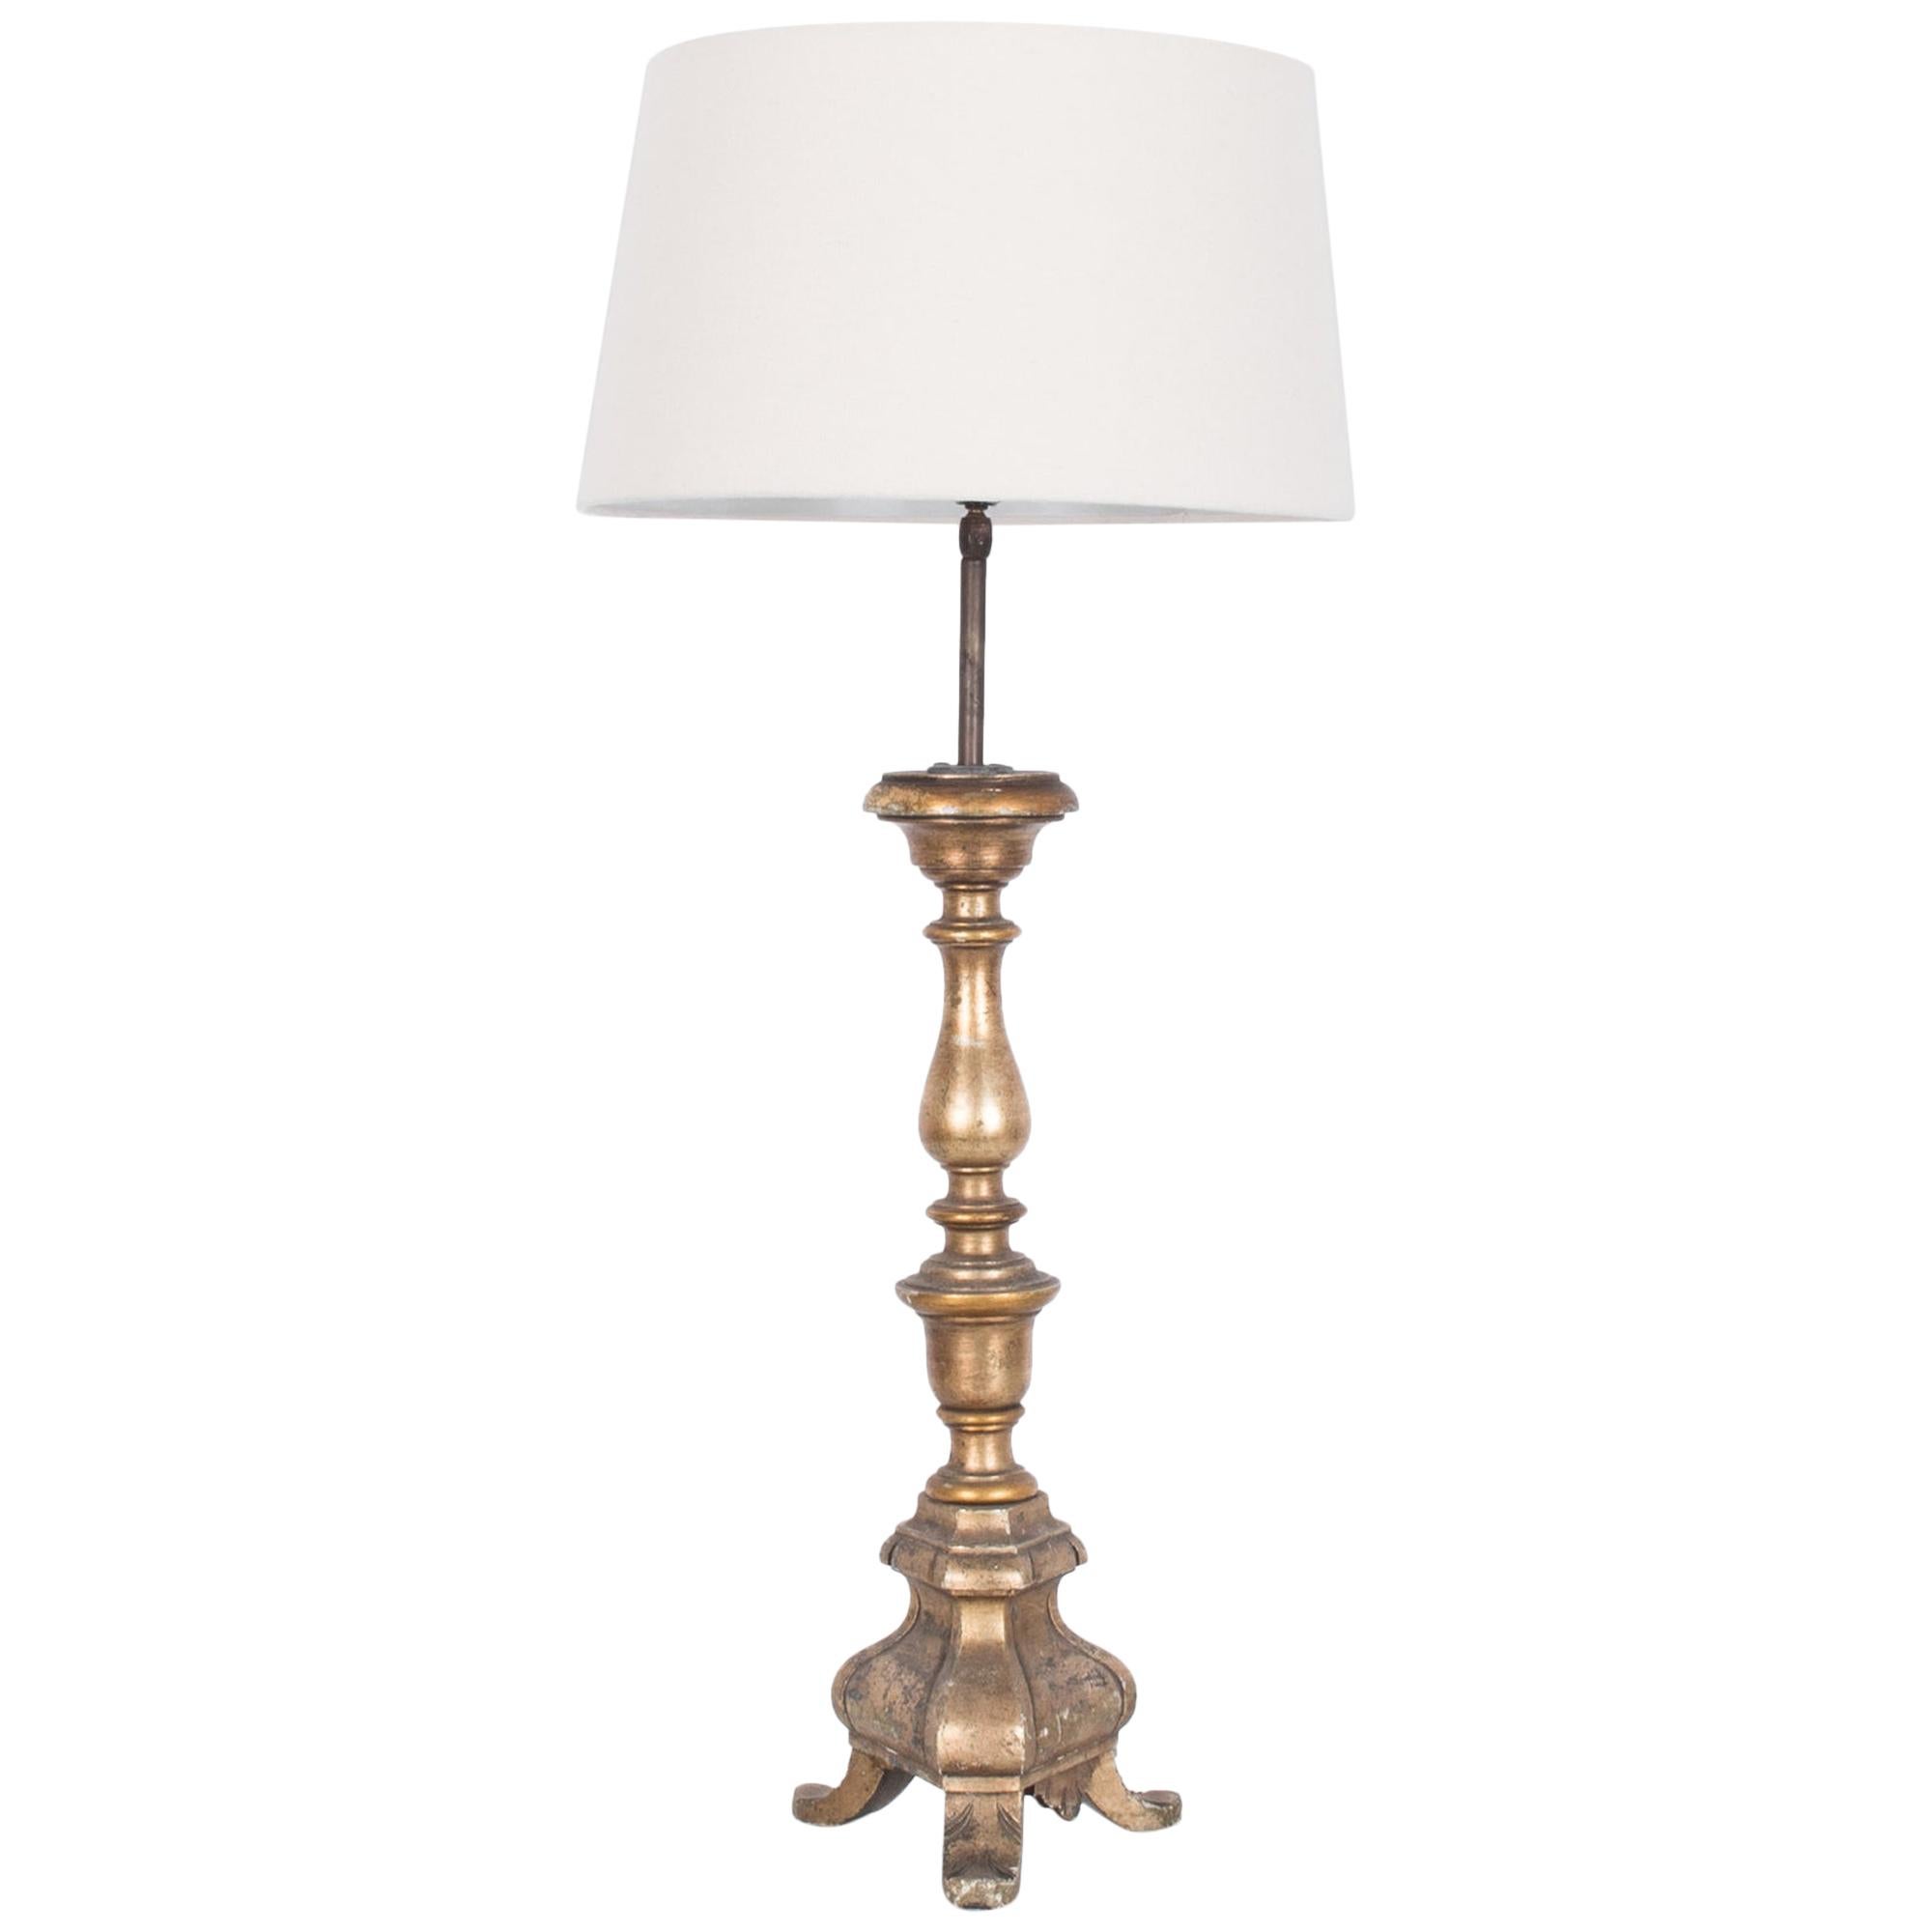 French Provincial Gilded Table Lamp For, Antique French Provincial Table Lamps